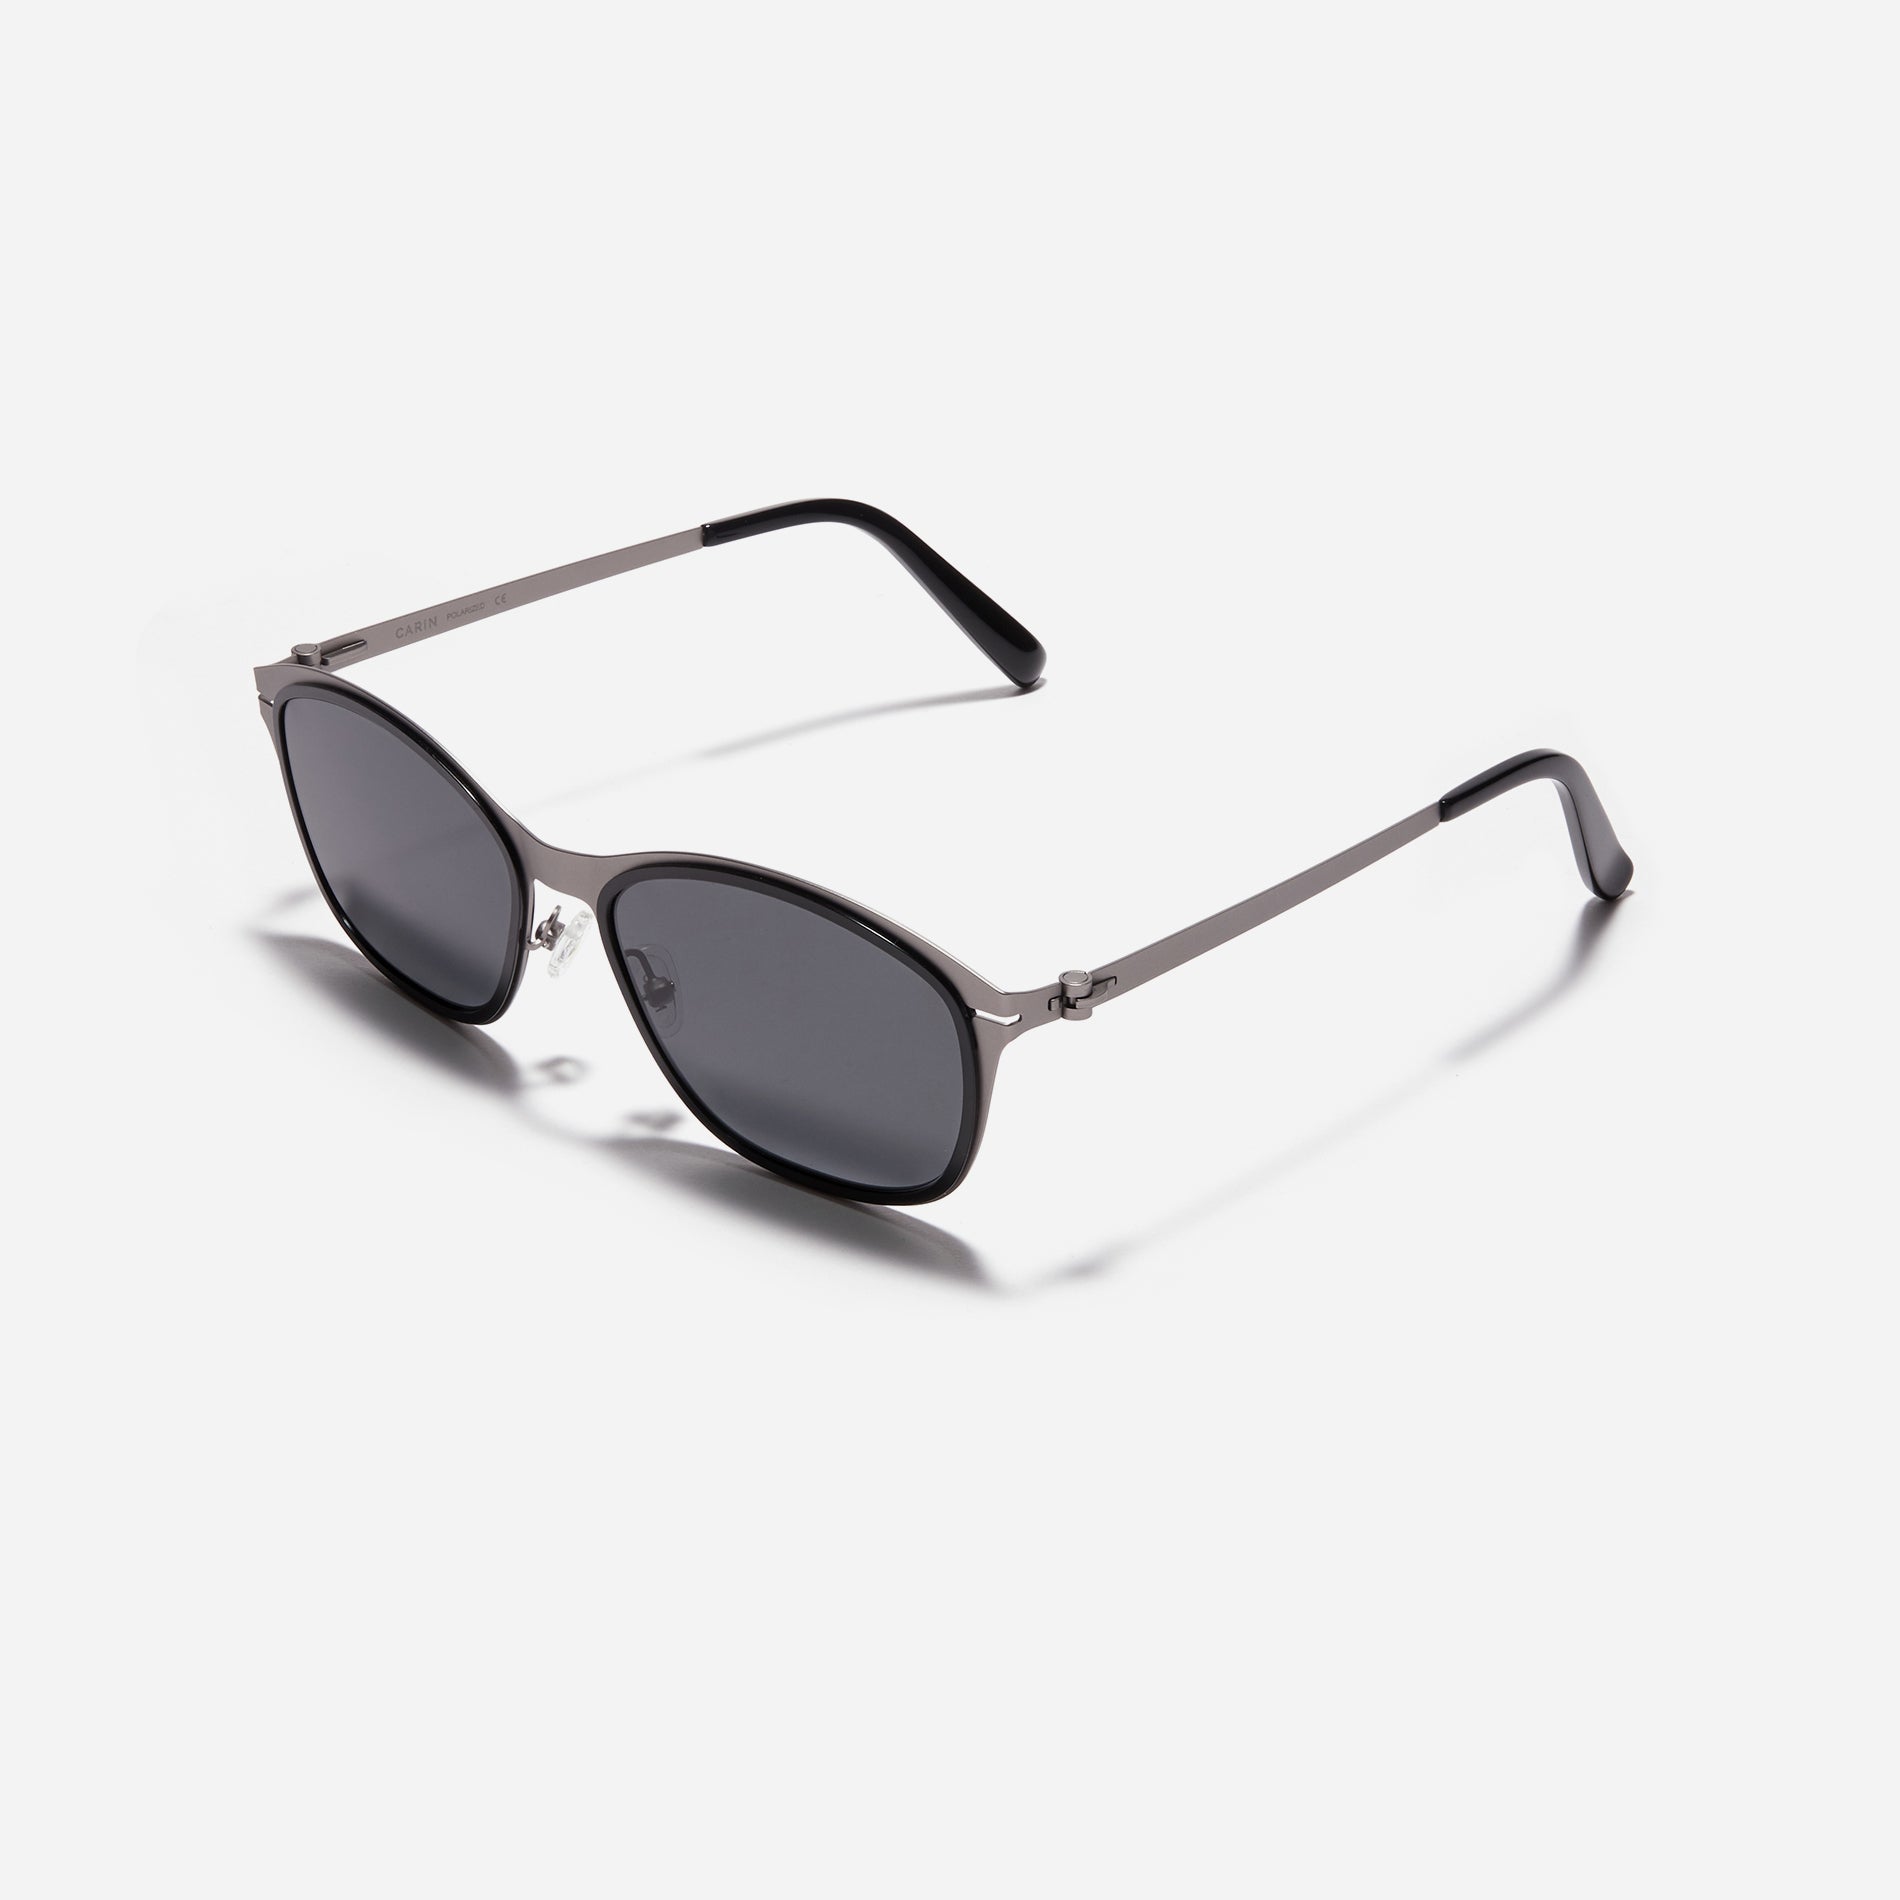 Square-shaped combination sunglasses from the POLARIZED line. With delicate acetate rims, metal temples, and patented screwless hinges, they ensure both durability and comfort. Borgarde features polarized lenses that block UV rays and reduce glare, providing clear vision for outdoor activities.